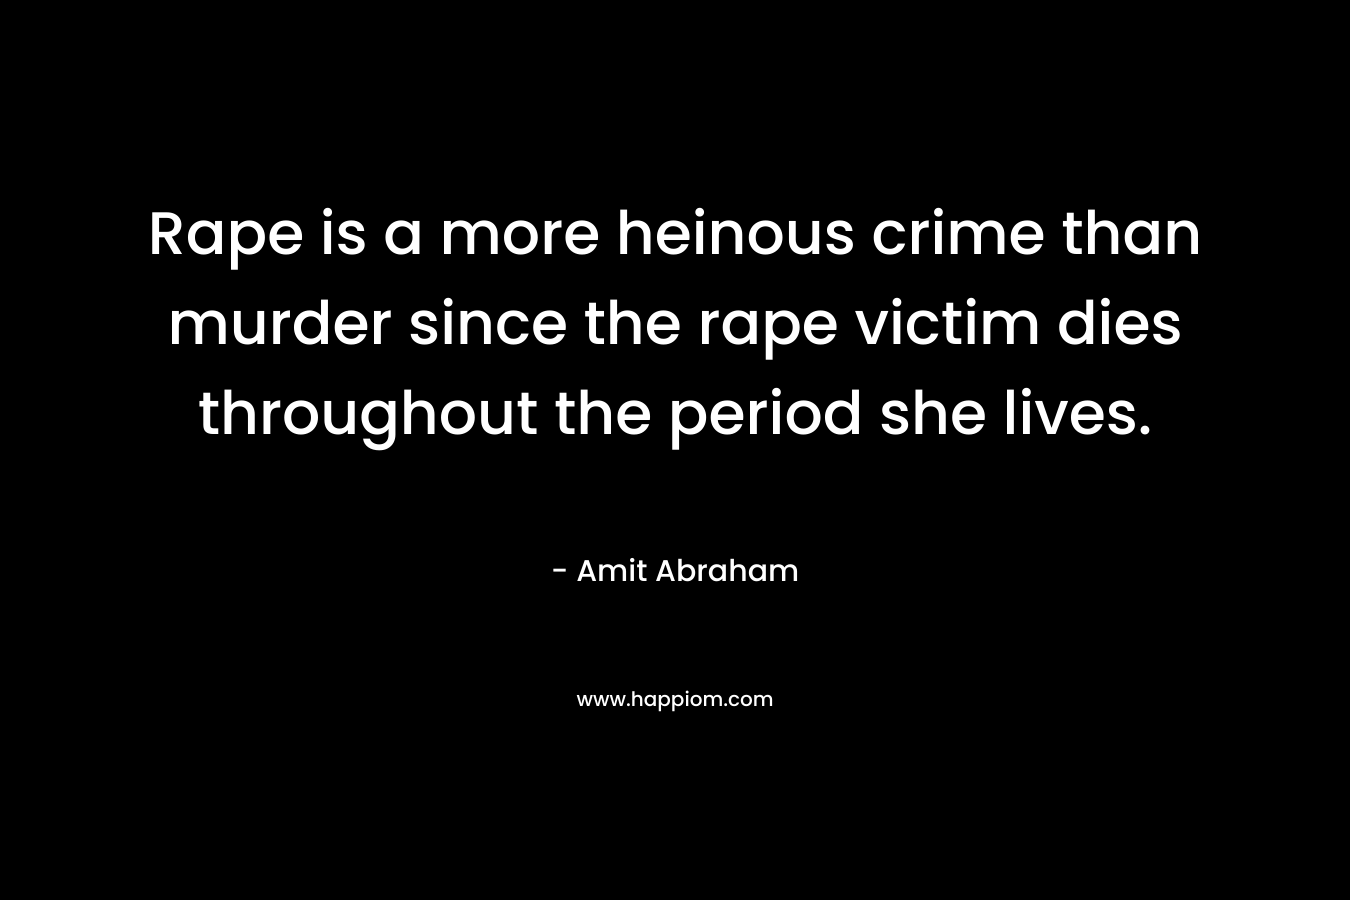 Rape is a more heinous crime than murder since the rape victim dies throughout the period she lives. – Amit Abraham